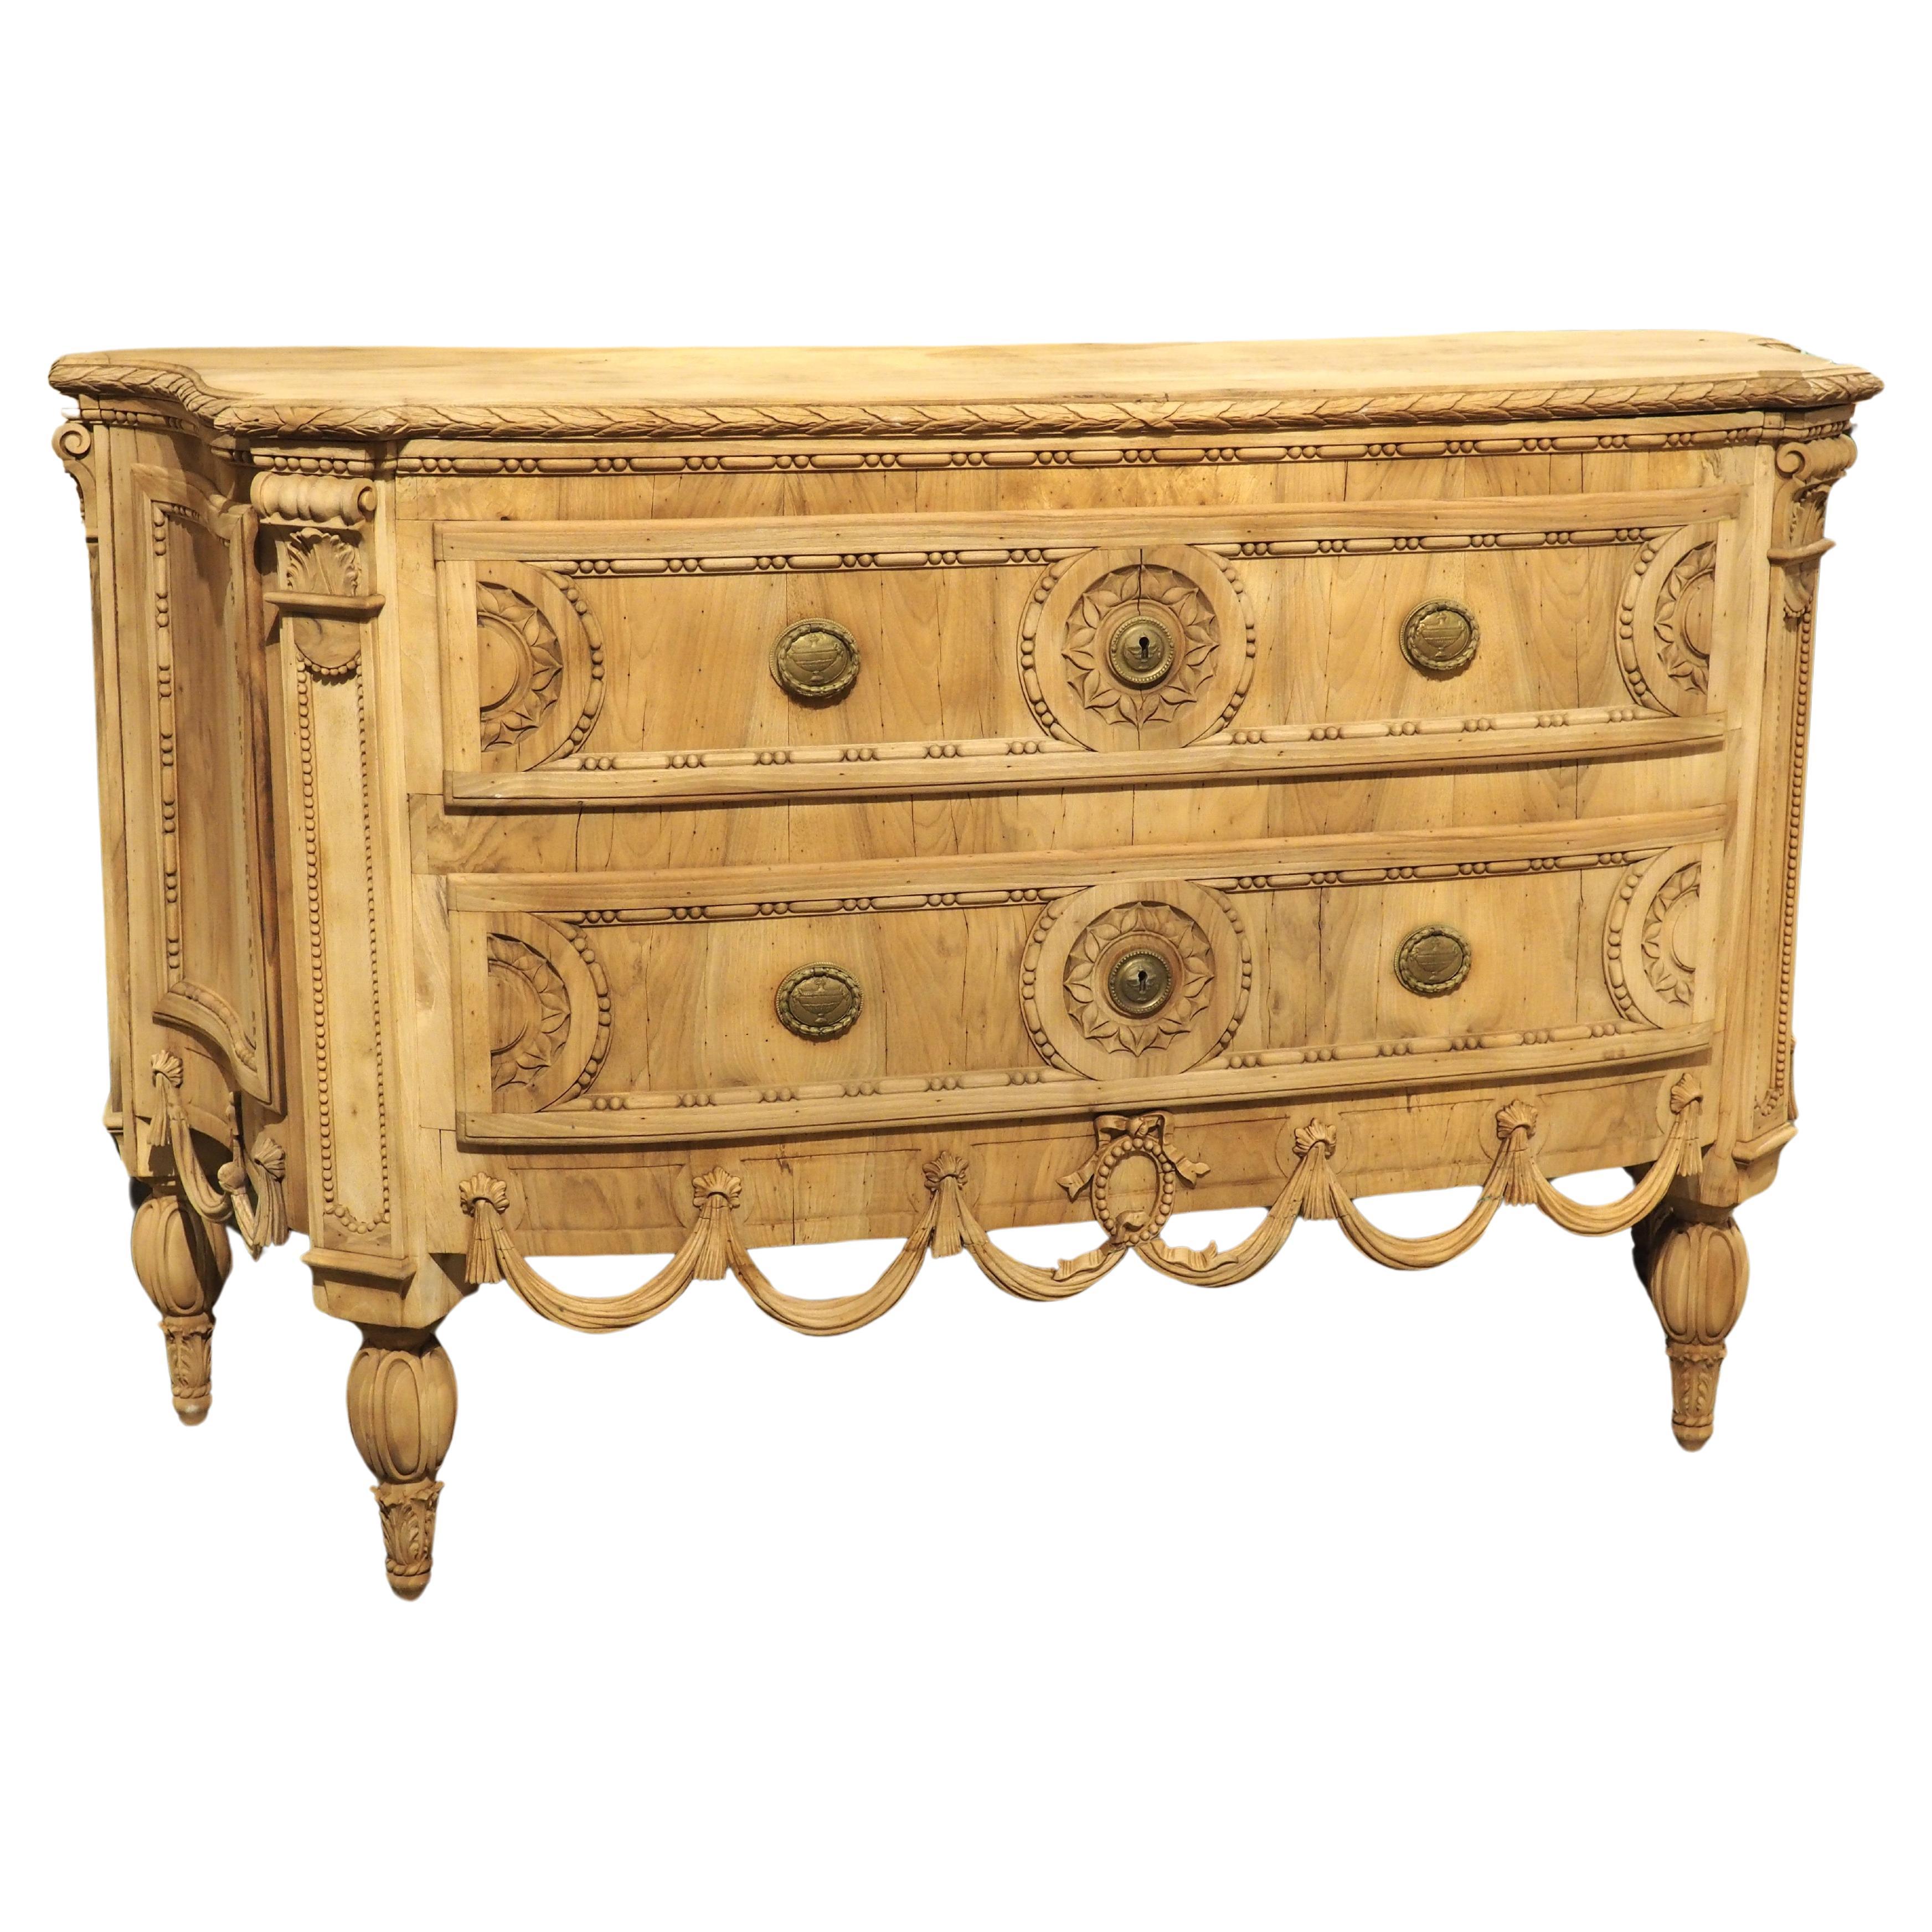 Circa 1870 Louis XVI Style Bleached Walnut Drapery Swag Commode from Italy For Sale